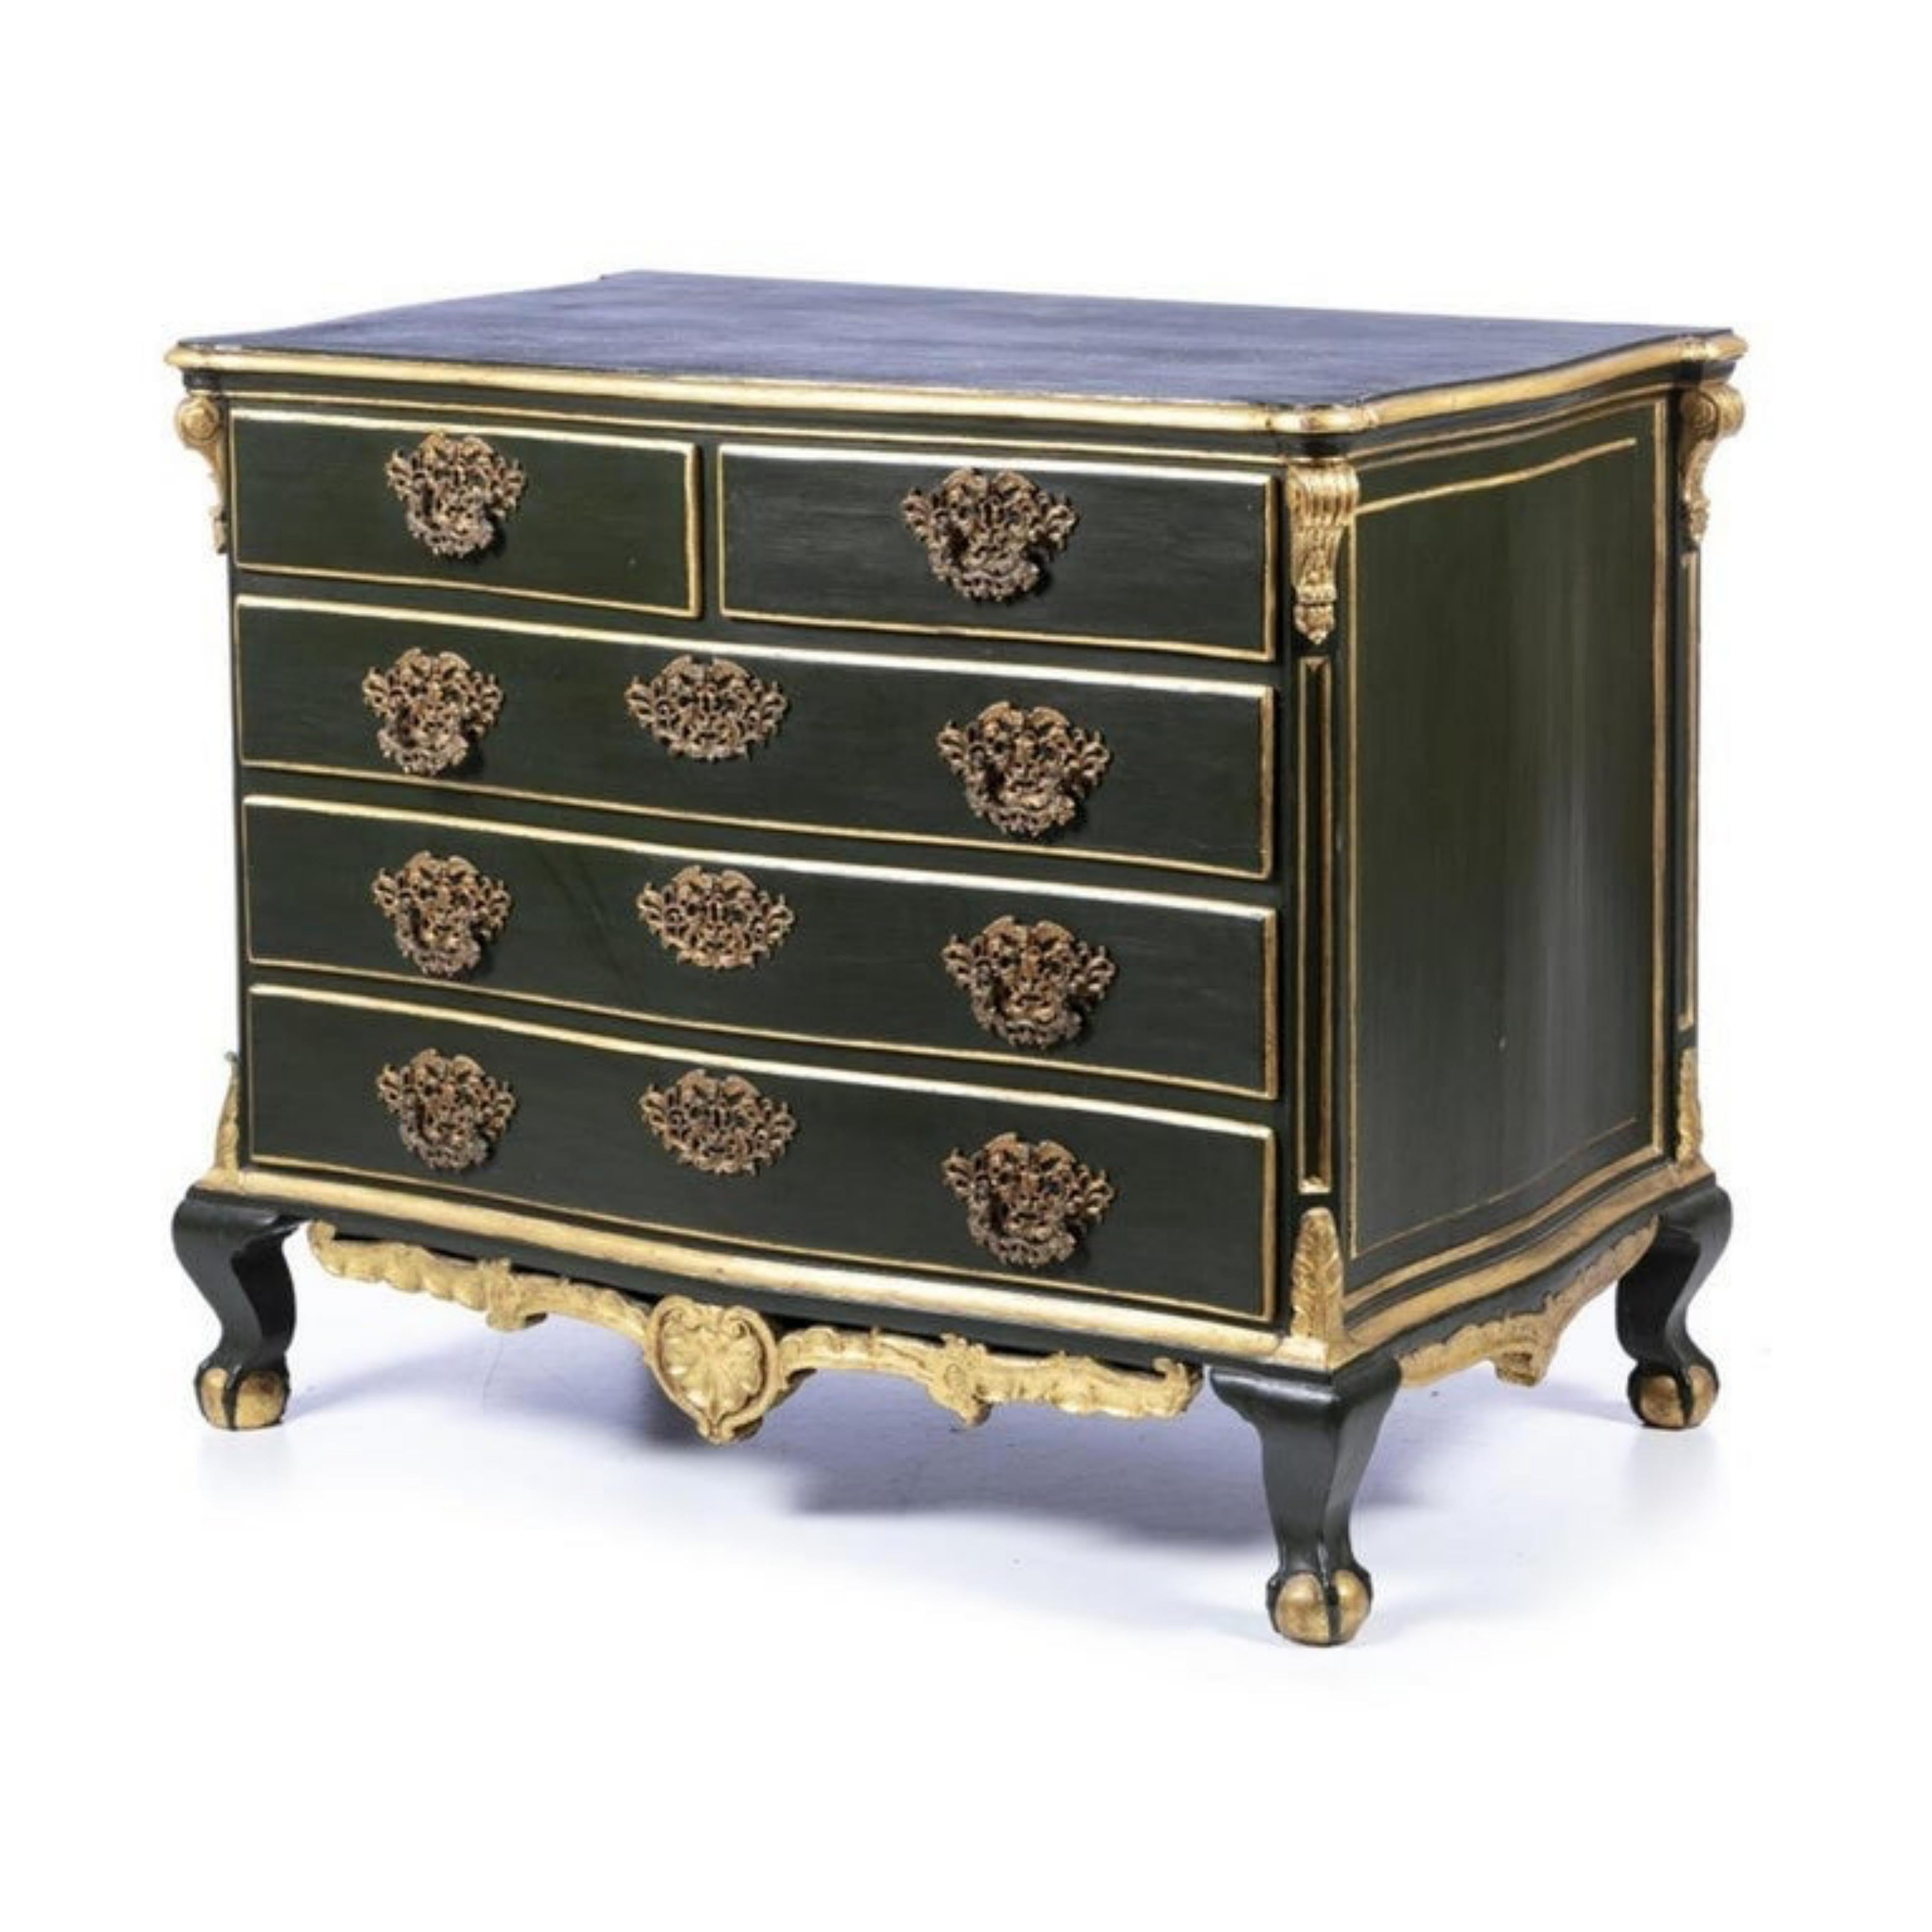 Portuguese dresser 18th century

In painted and gilded wood, with two drawers and three drawers. Wavy body, protruding carved pilasters, decorated with vegetal windings, scalloped skirt Resting on four feet ending in claw and ball. 
Bronze fittings.